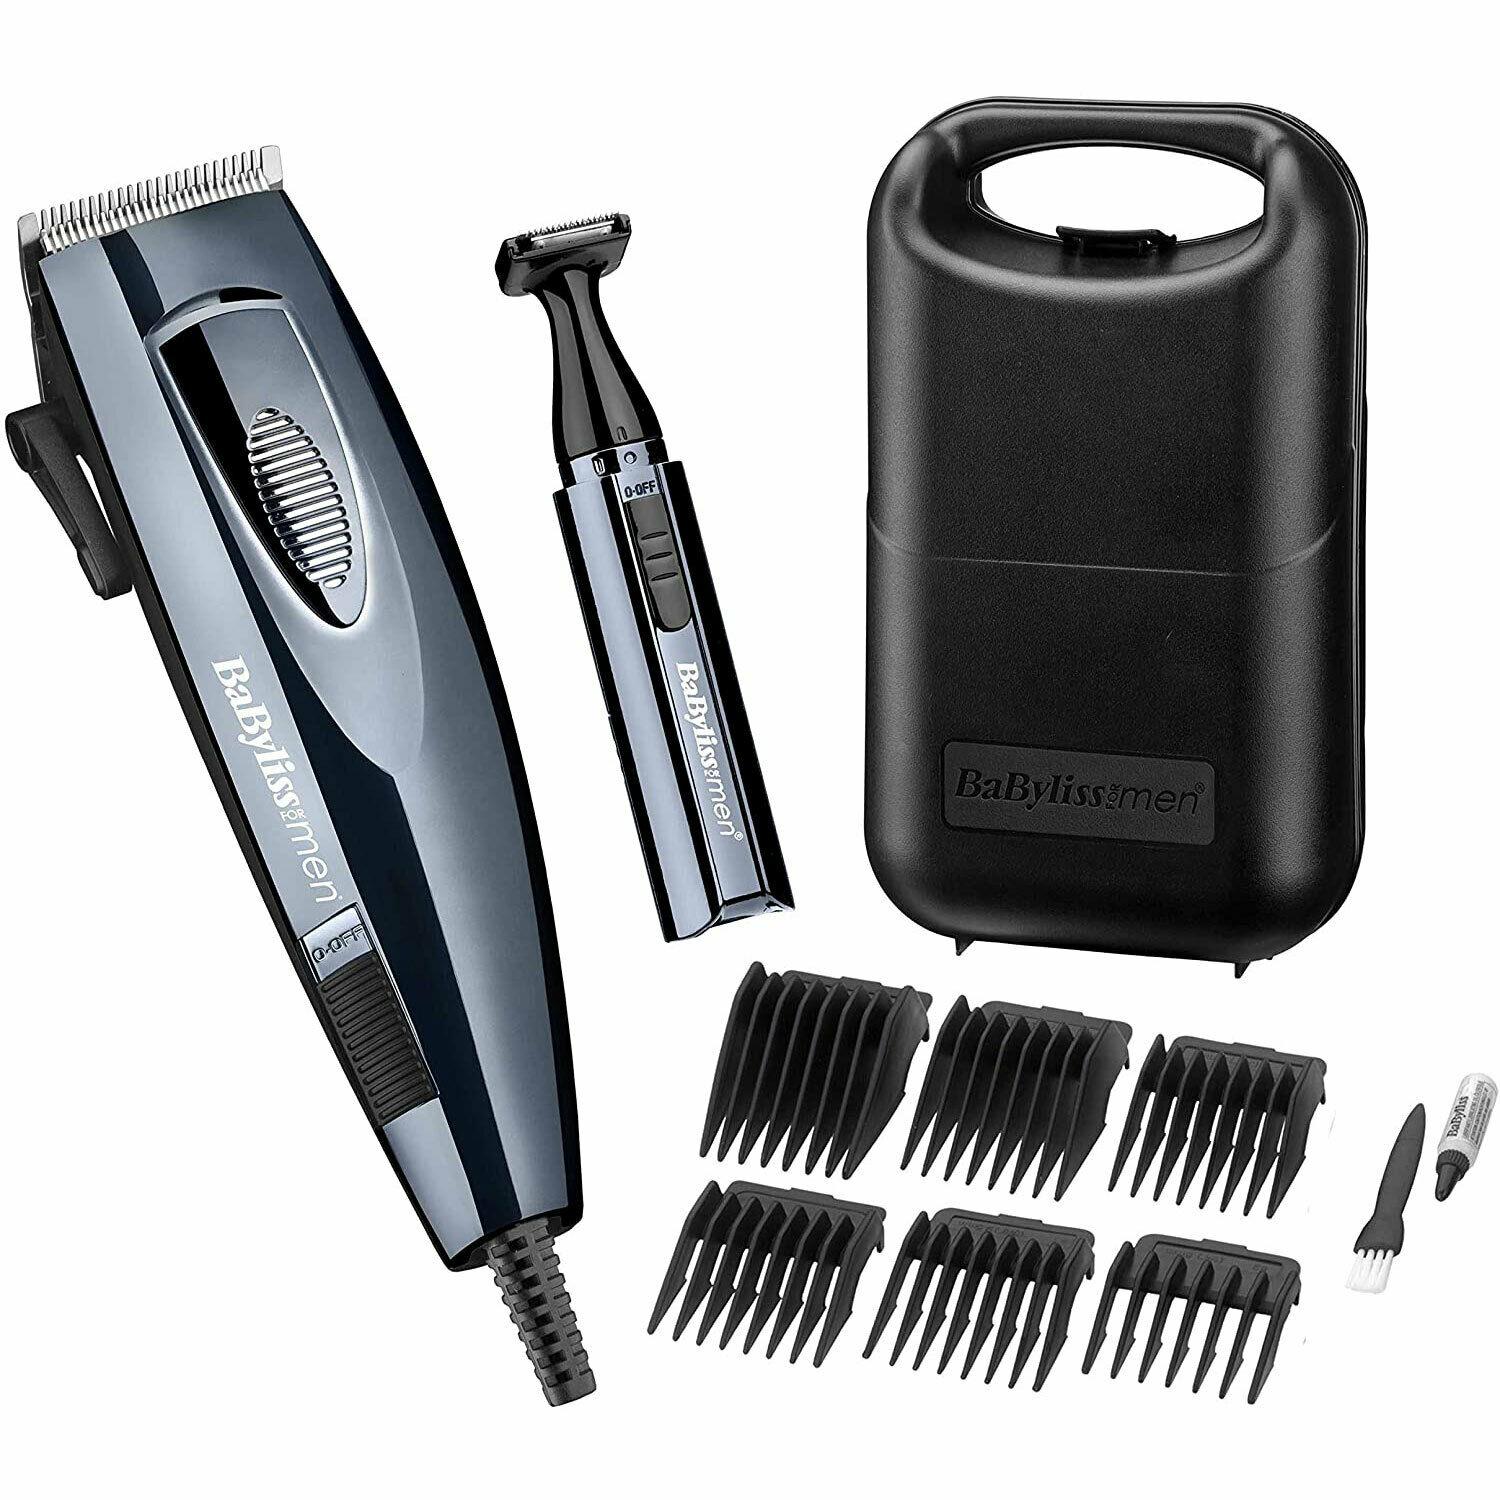 Babyliss Hair Clippers Corded Clippers Pro Hair Cutting Styling Head Shaver - 7456U